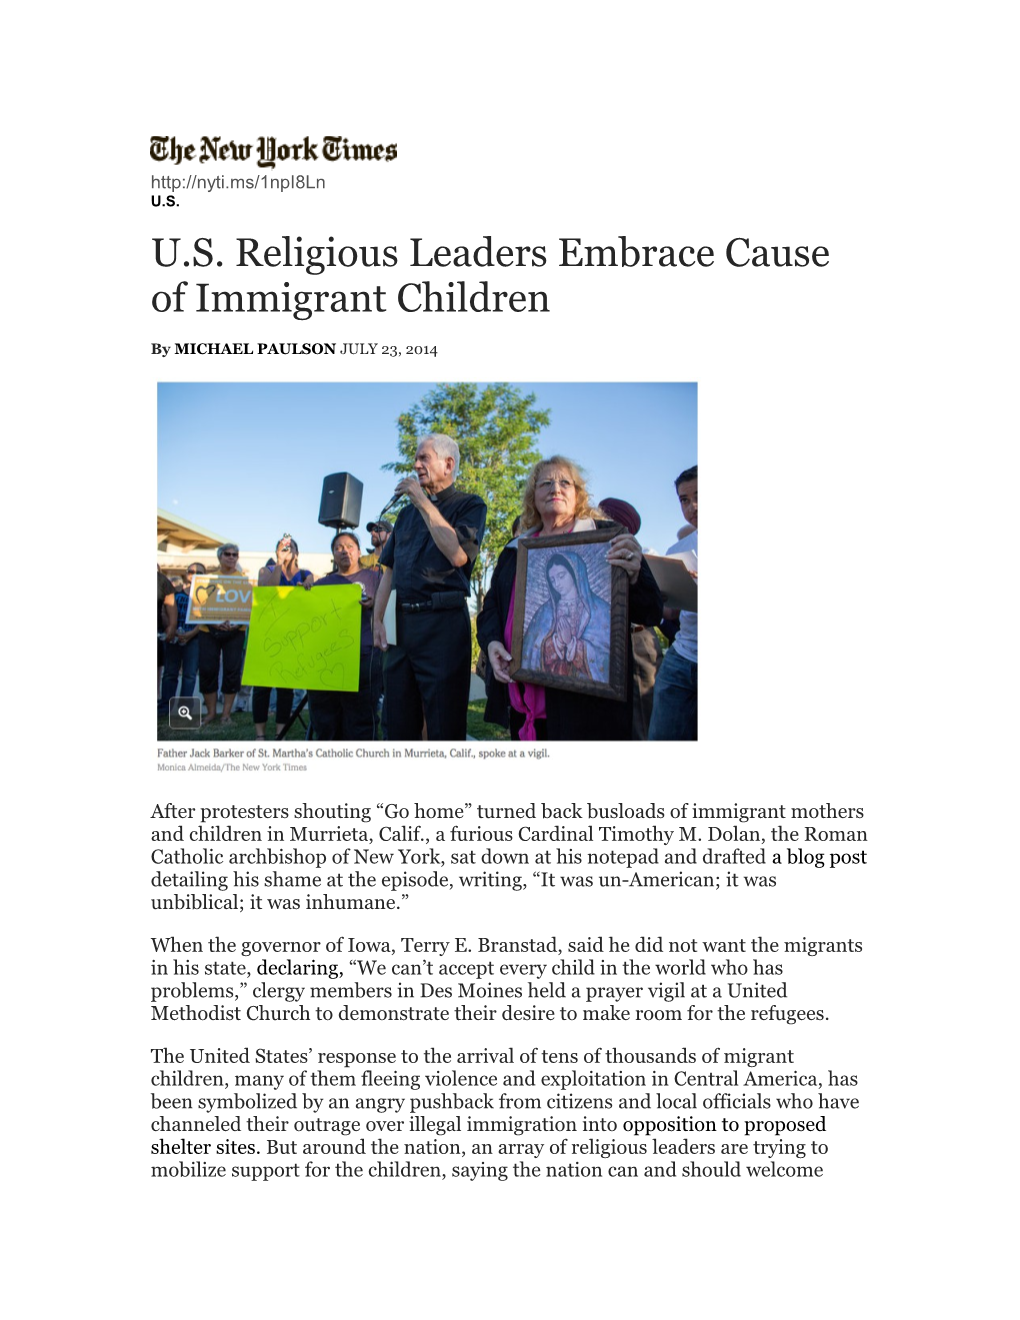 U.S. Religious Leaders Embrace Cause of Immigrant Children